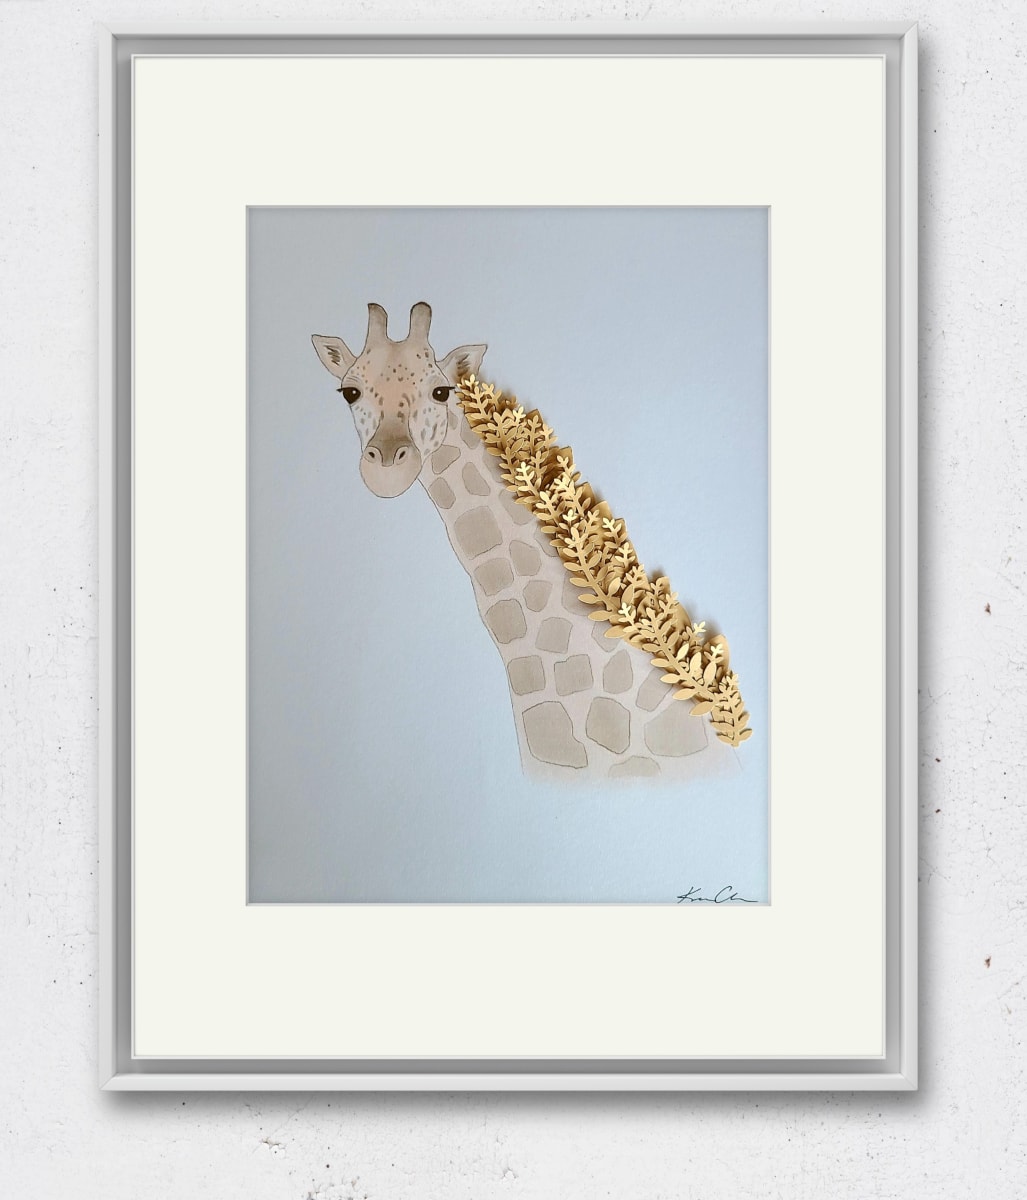 The Friendly Giraffe by Kerrie Chacon  Image: Giraffe's teach us lessons about living, being humble and having faith.